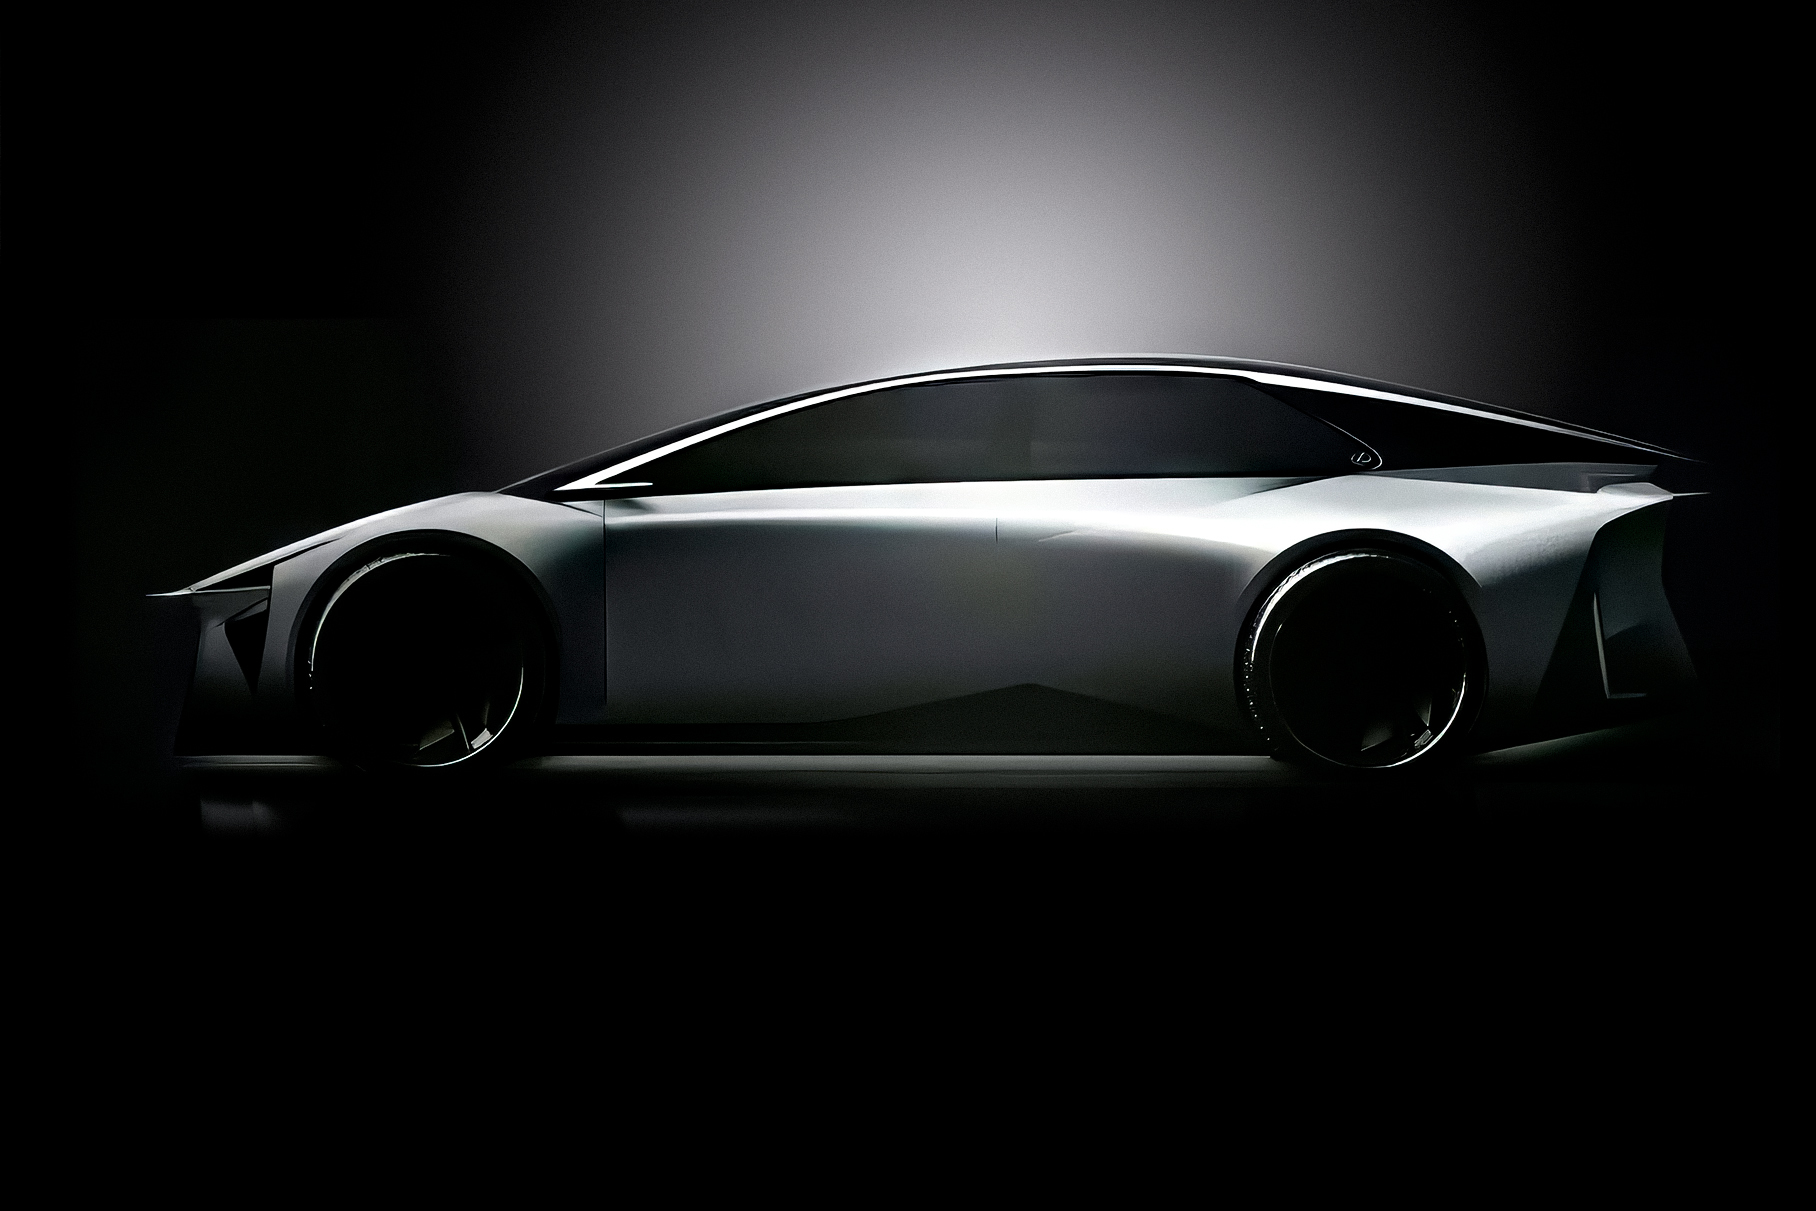 In October, Lexus will show the harbinger of a new production electric car